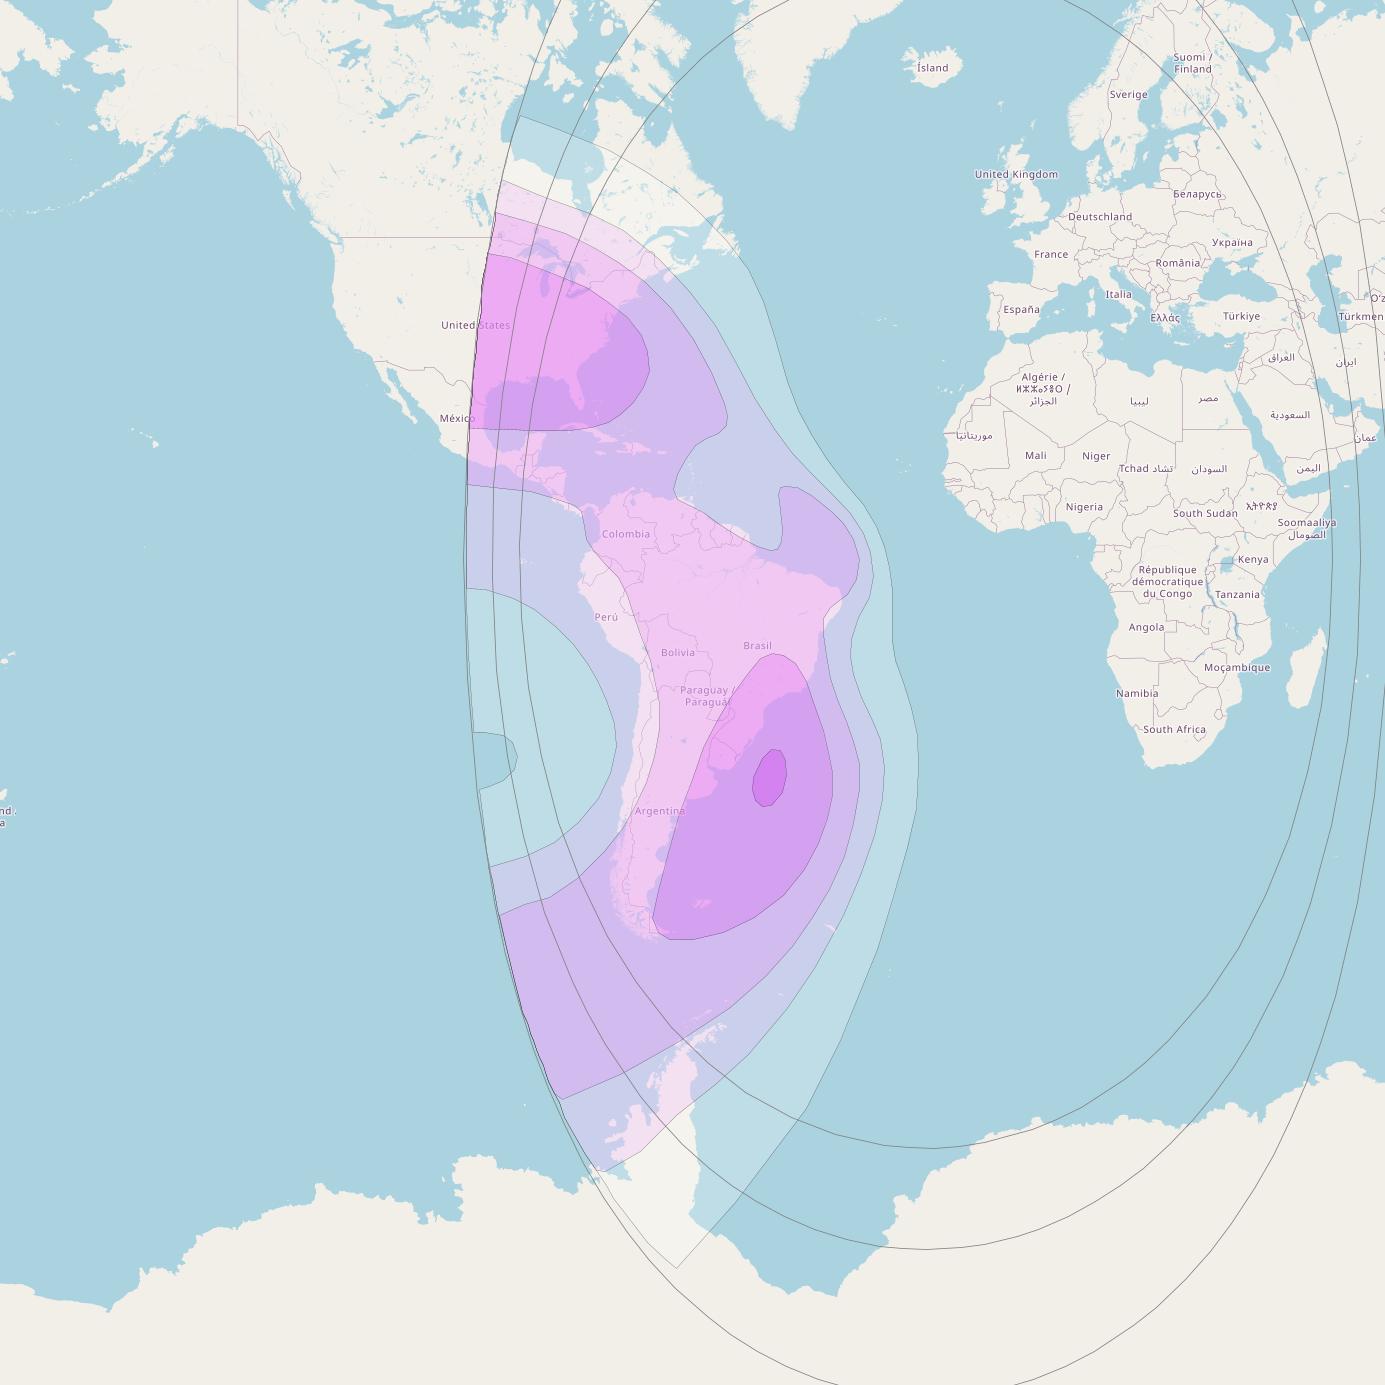 NSS 7 at 20° W downlink C-band West Hemi Beam coverage map